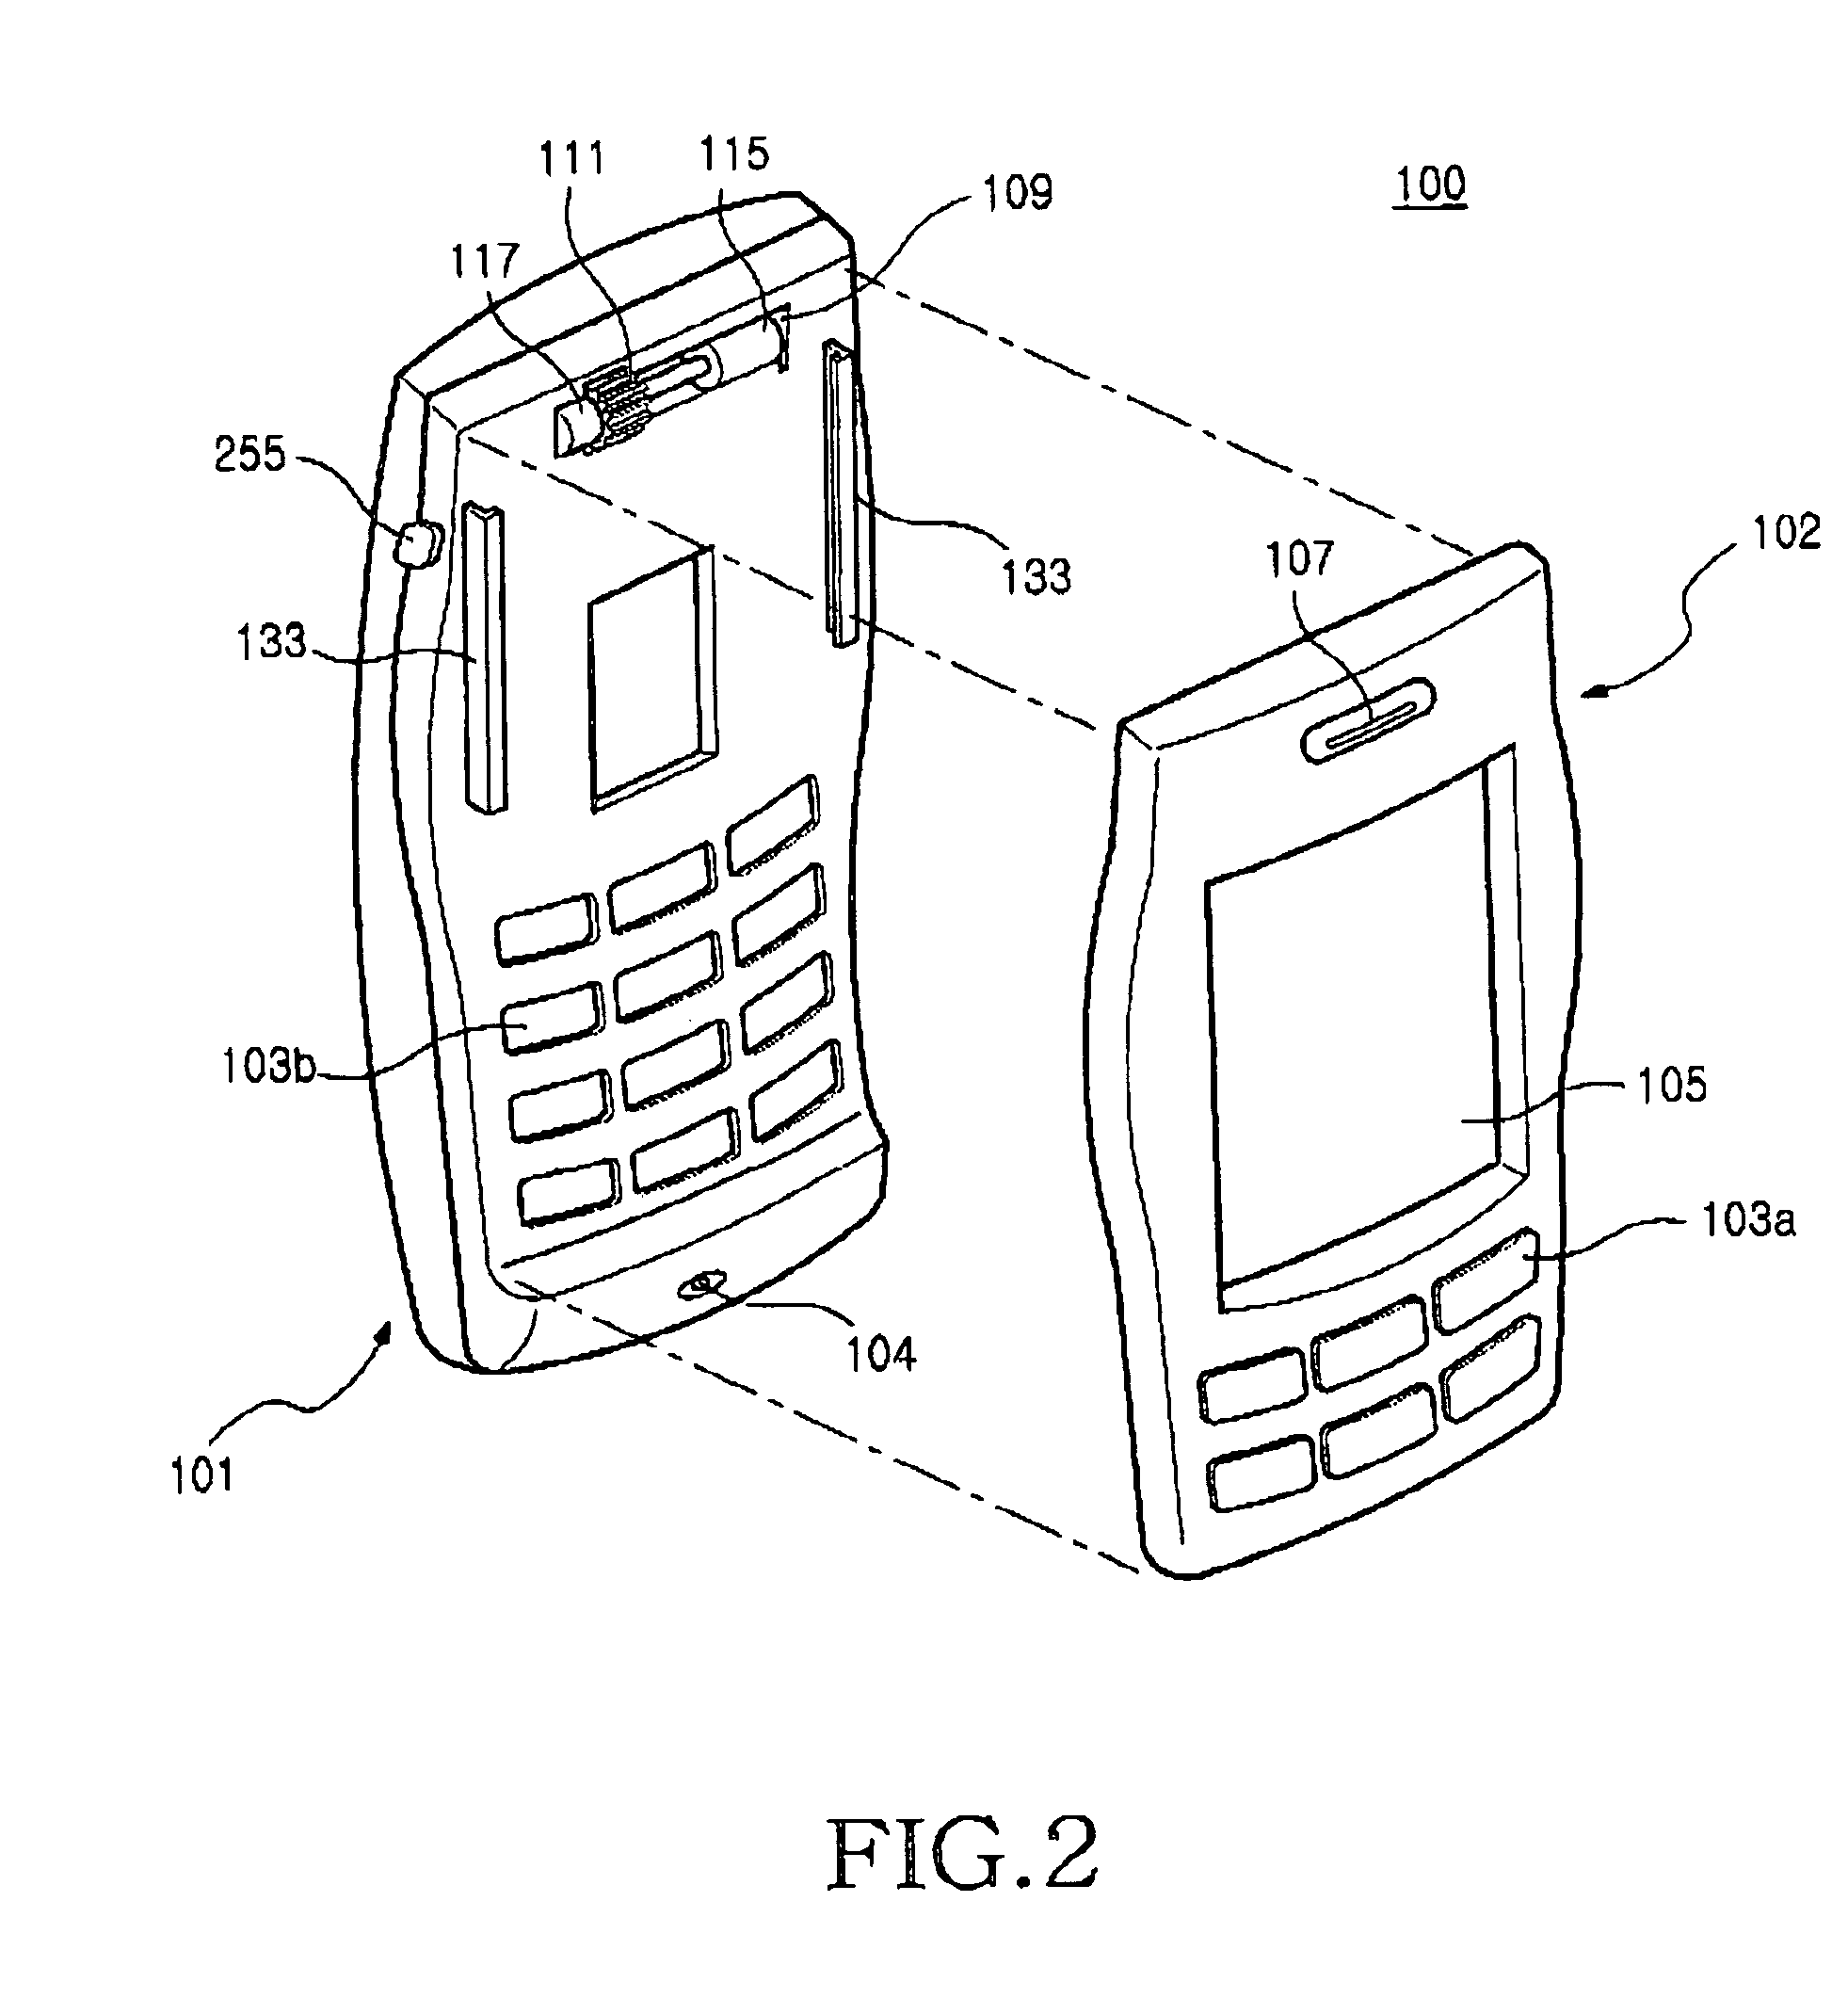 Sliding-type portable wireless terminal and method for controlling sliding movement in the same